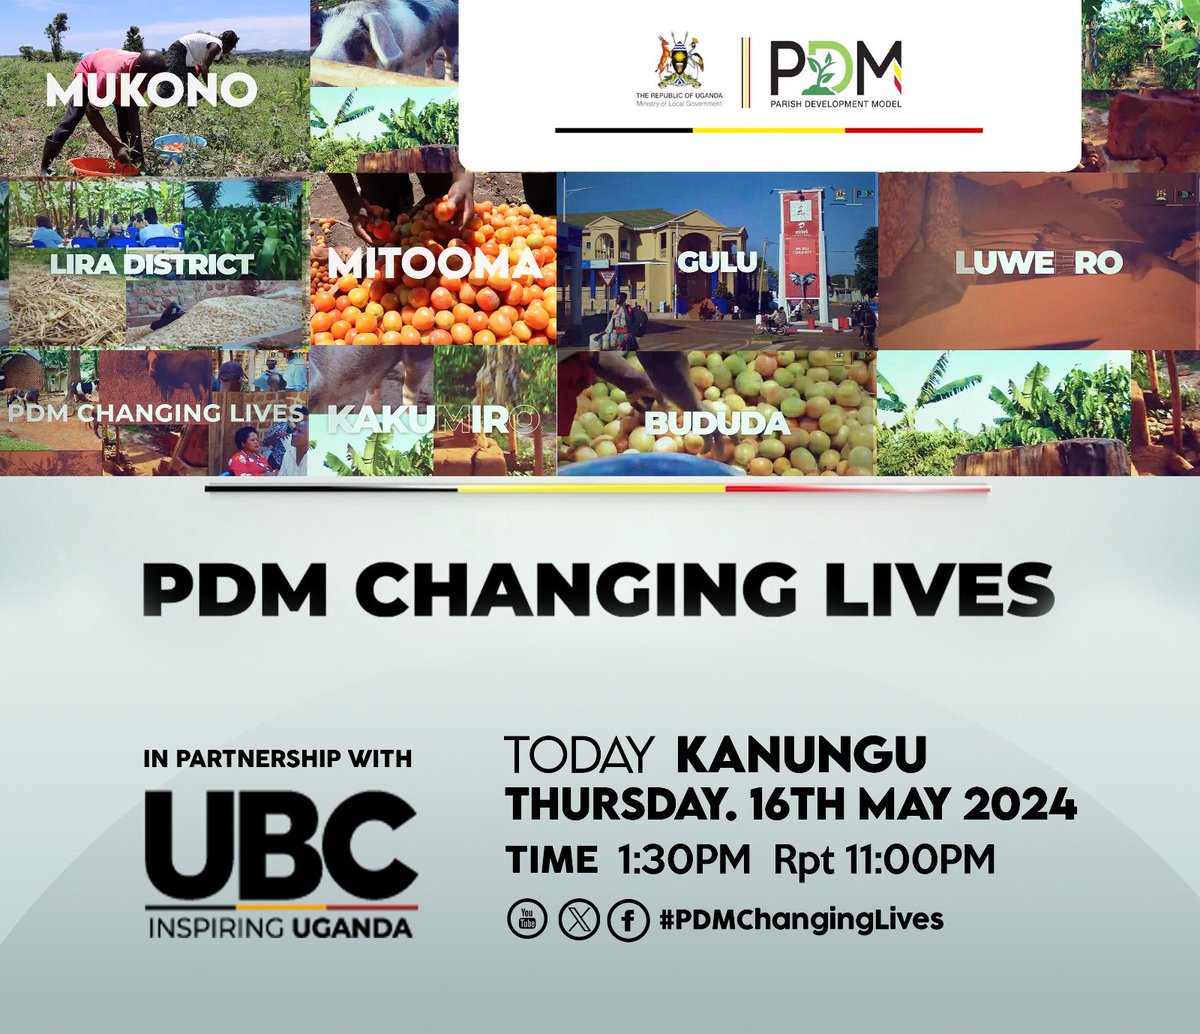 Today: 𝐏𝐃𝐌 𝐂𝐡𝐚𝐧𝐠𝐢𝐧𝐠 𝐋𝐢𝐯𝐞𝐬

 Catch stories of progress and empowerment as communities flourish with the support they've received from the Parish Development Model.    
#UBCUpdates | #PDMChangingLives